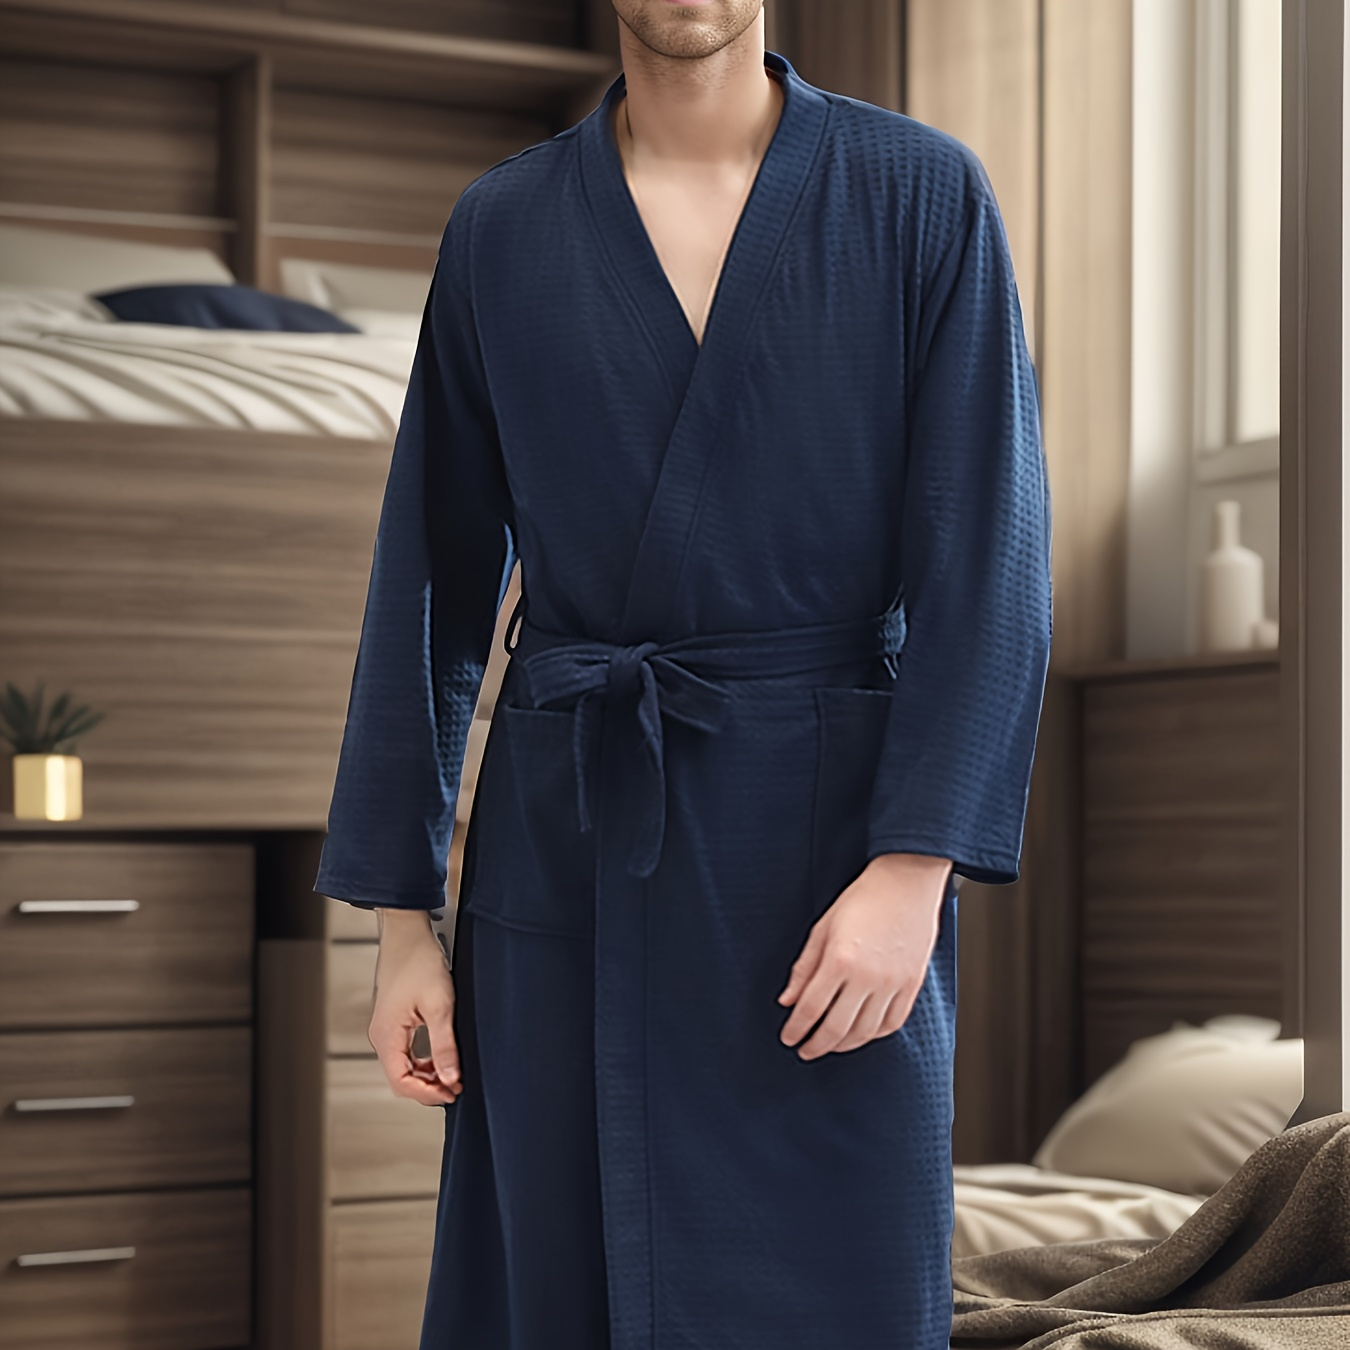 

Men's Waffle Knit Soft Bathrobe, Loose & Comfy Sleepwear Robe, Absorbent Quick Dry Spa Robe For Home, Casual Style Pajama